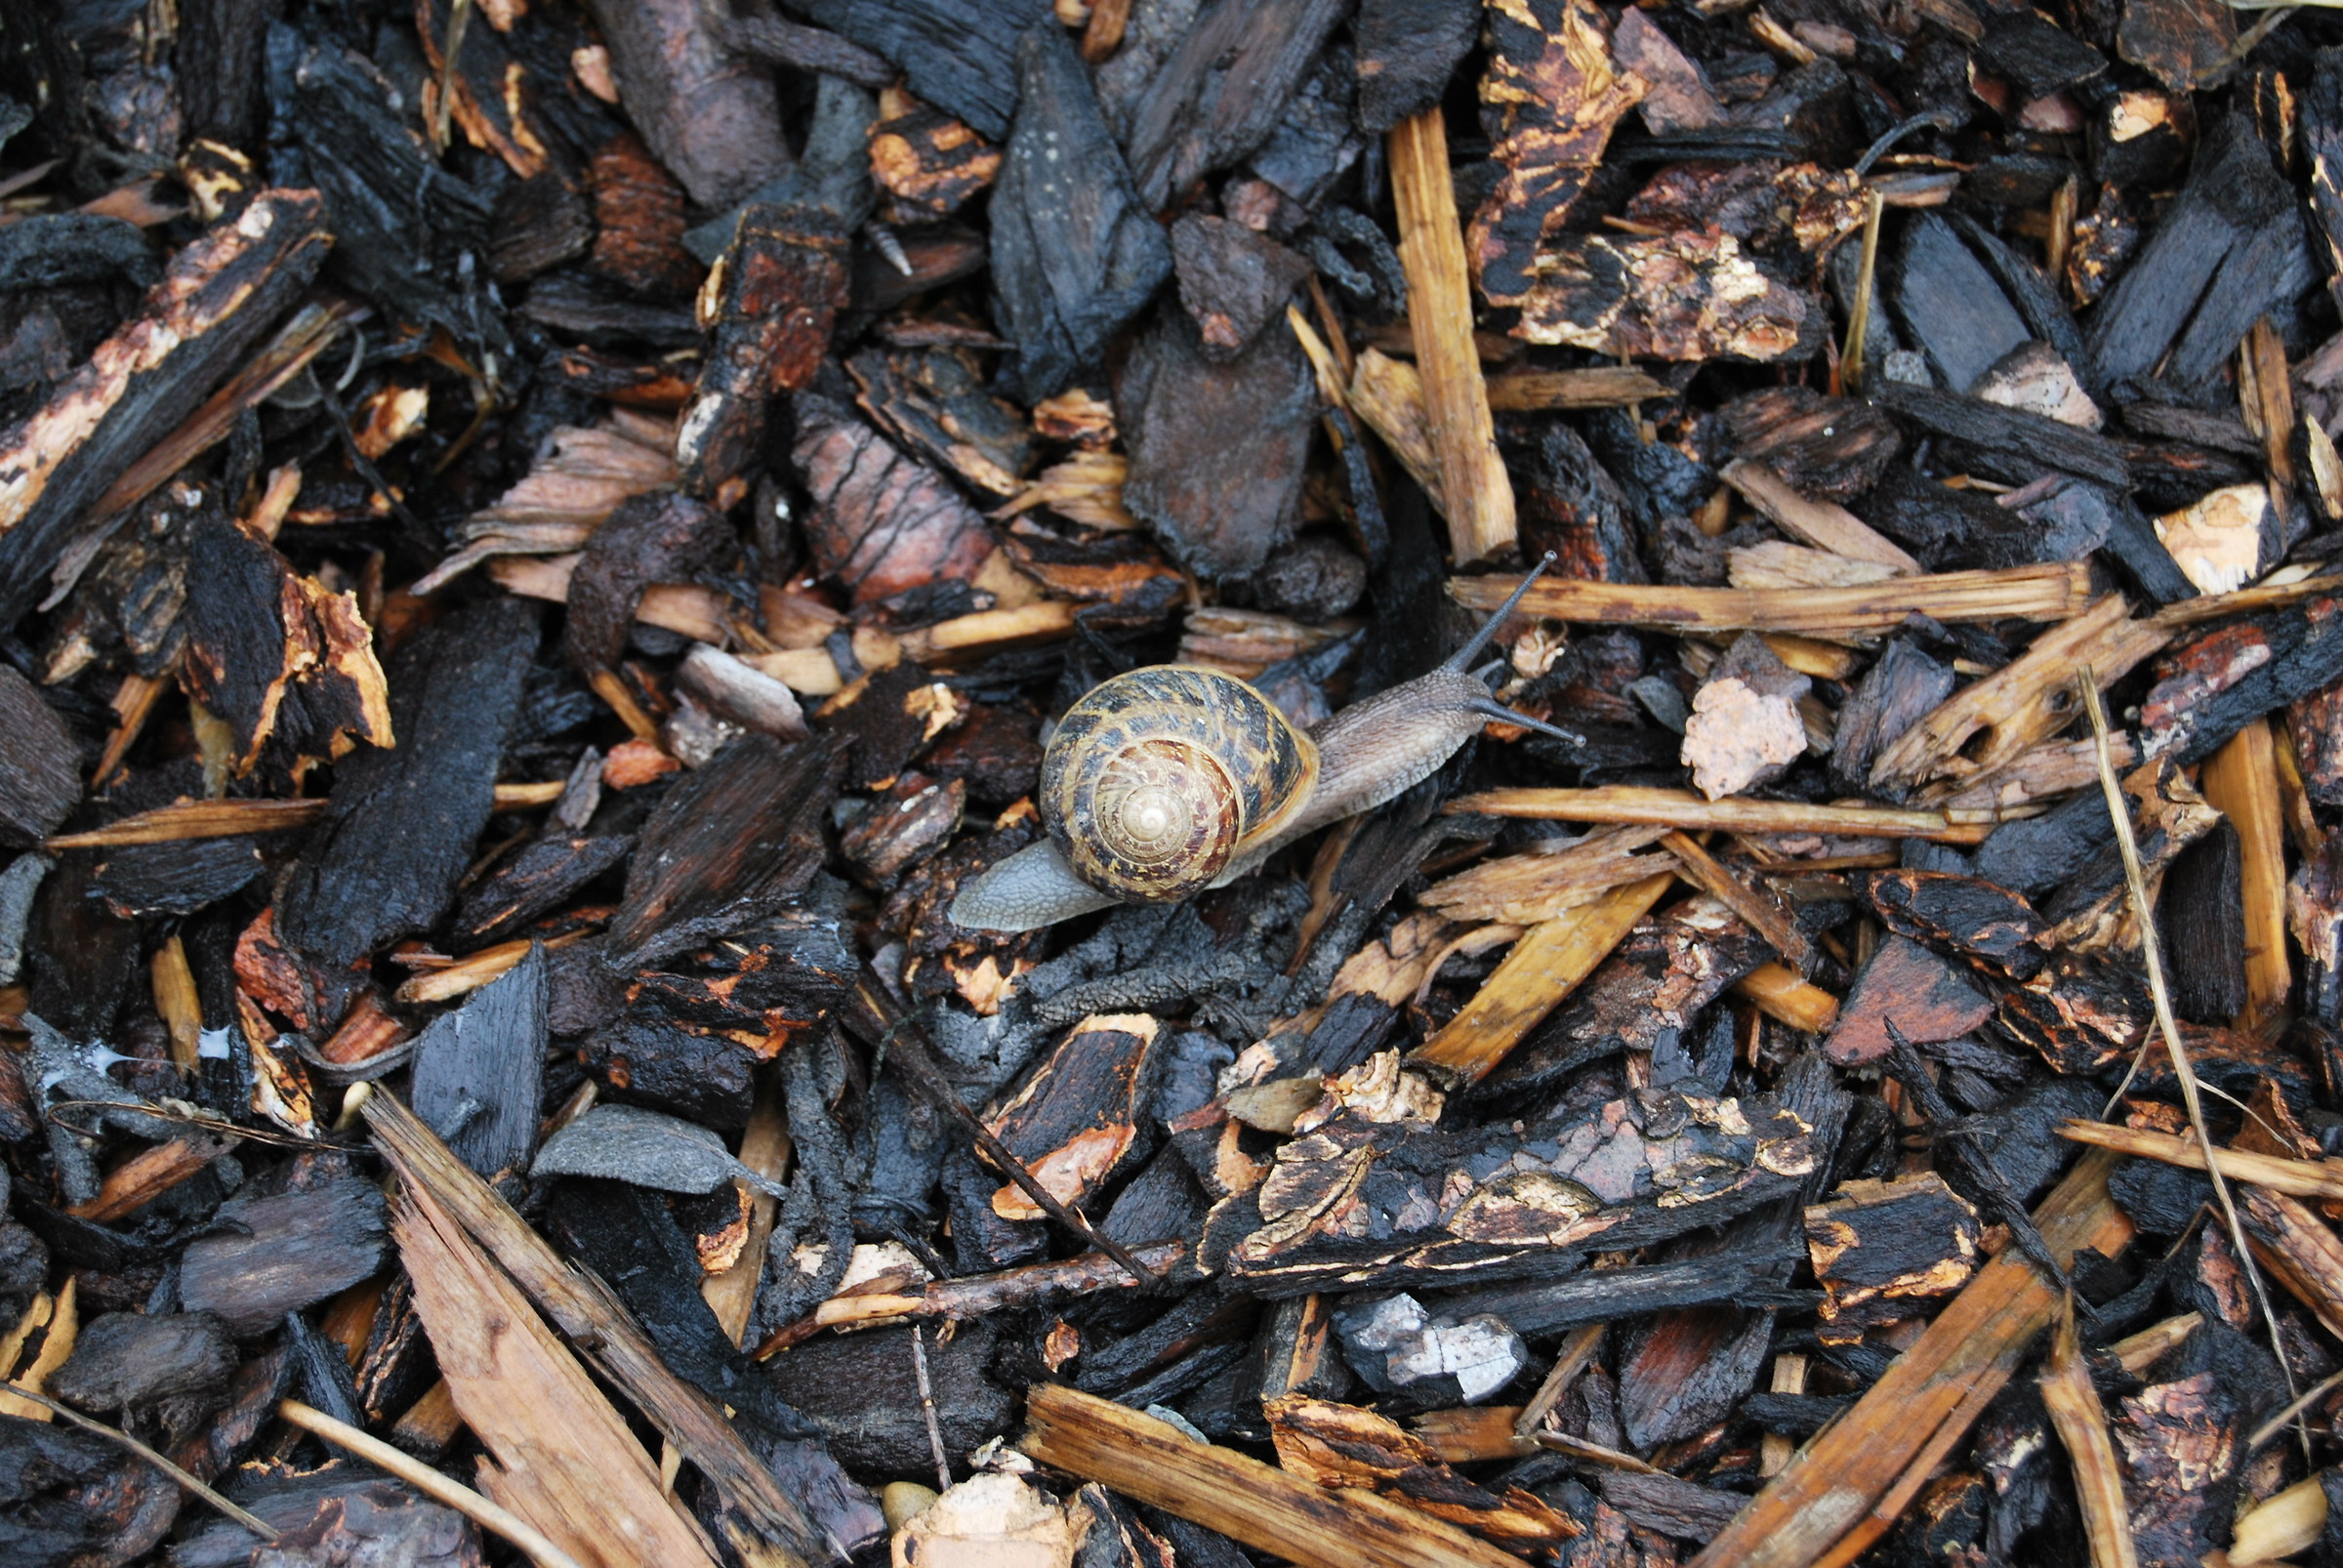 Snail ... camouflage in Burgundy...